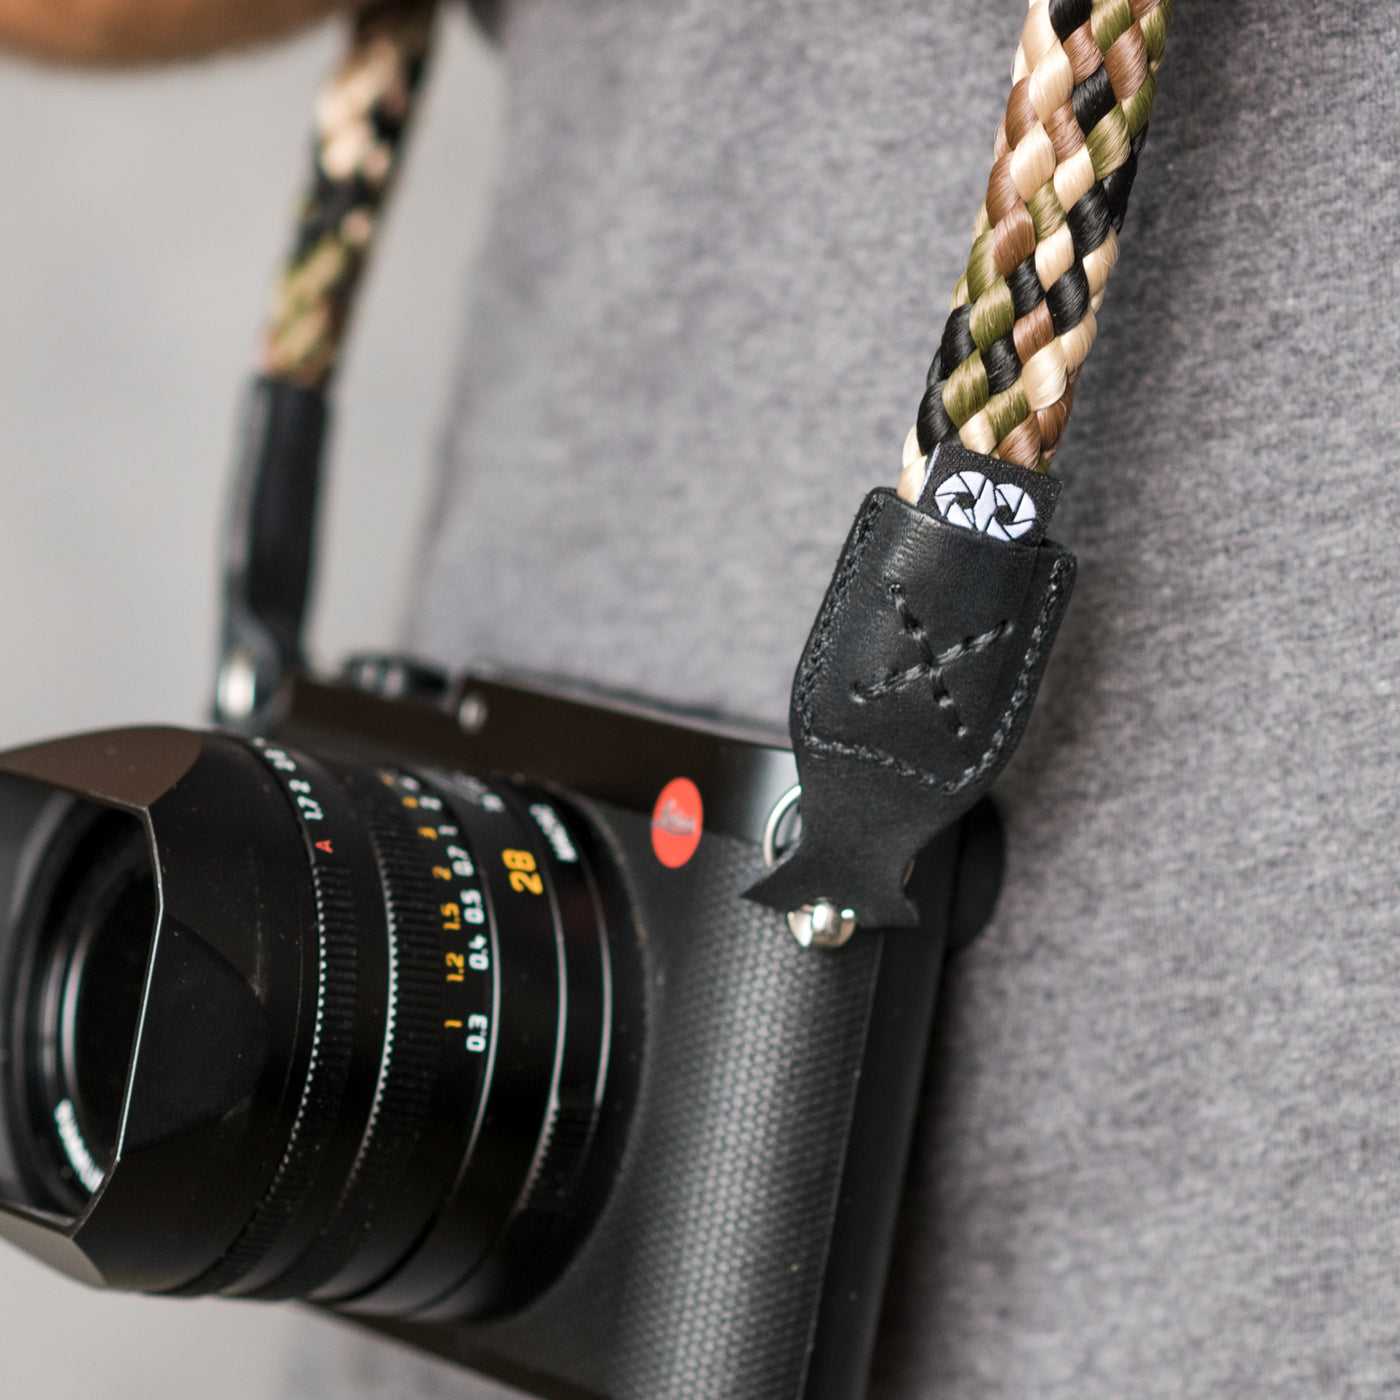 Leica camera on a photographer's hip held with braid camera strap 